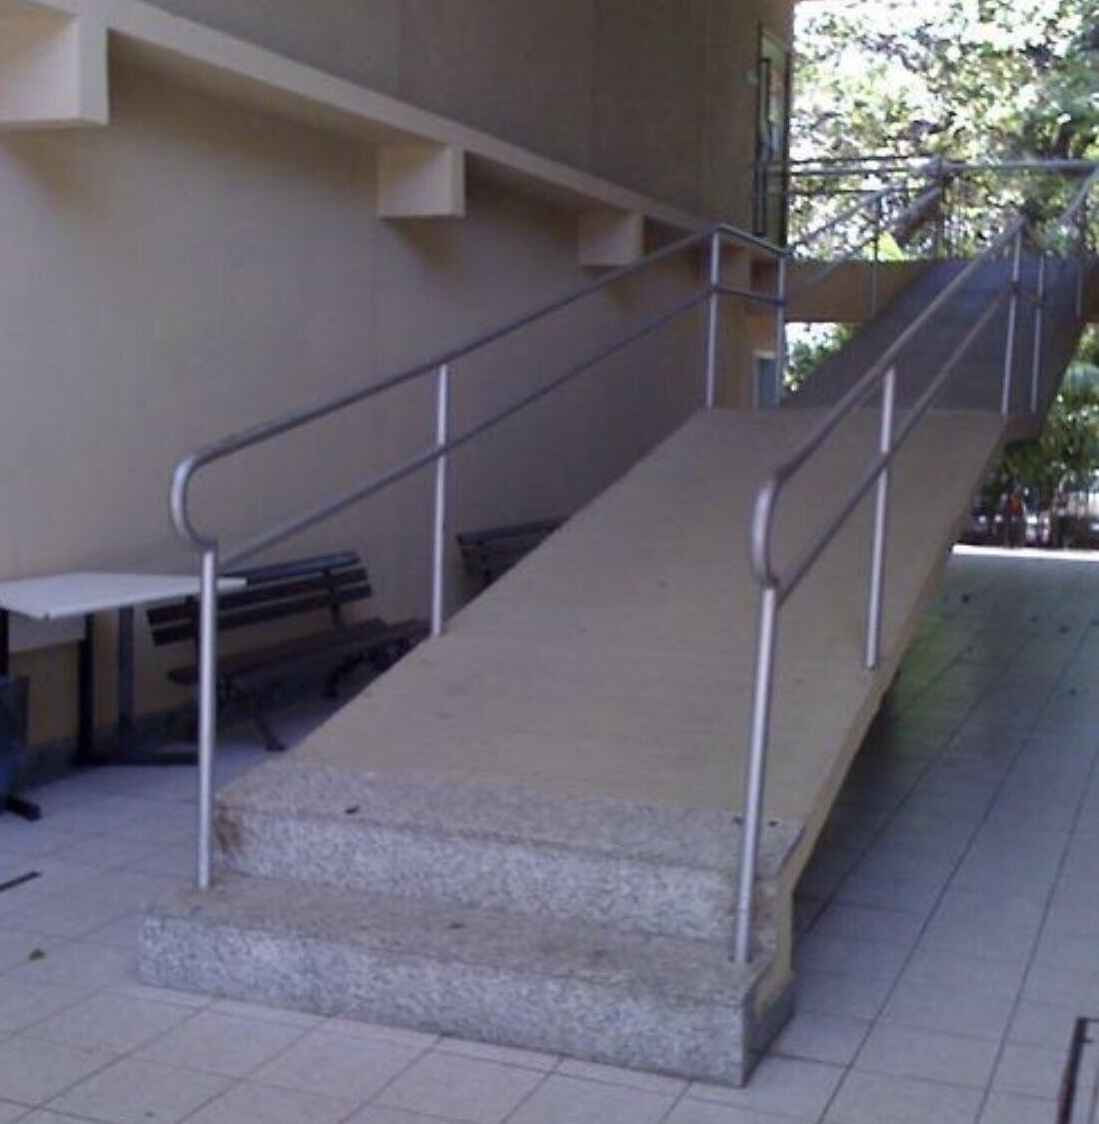 A long ramp that is not accessible because it starts with 2 steps.